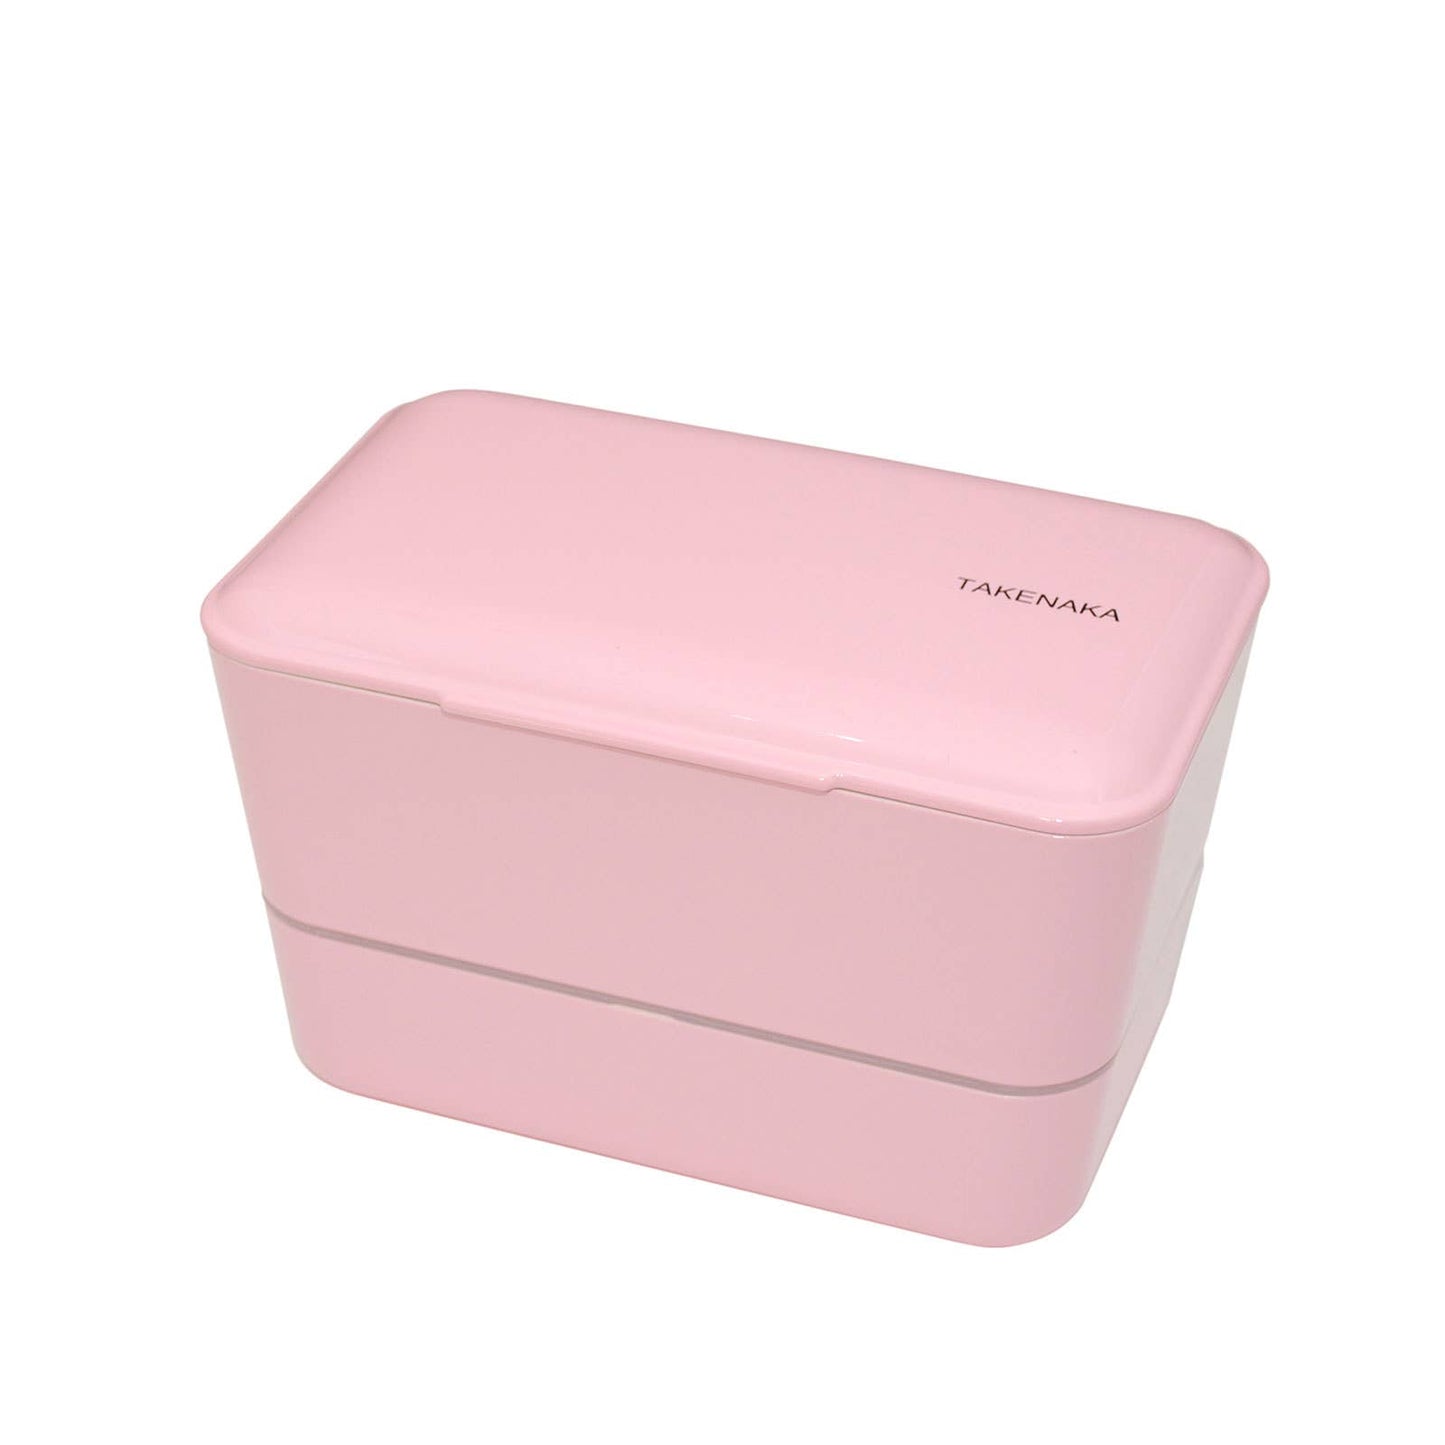 2-tier bento box by Takenaka in color Candy Pink 